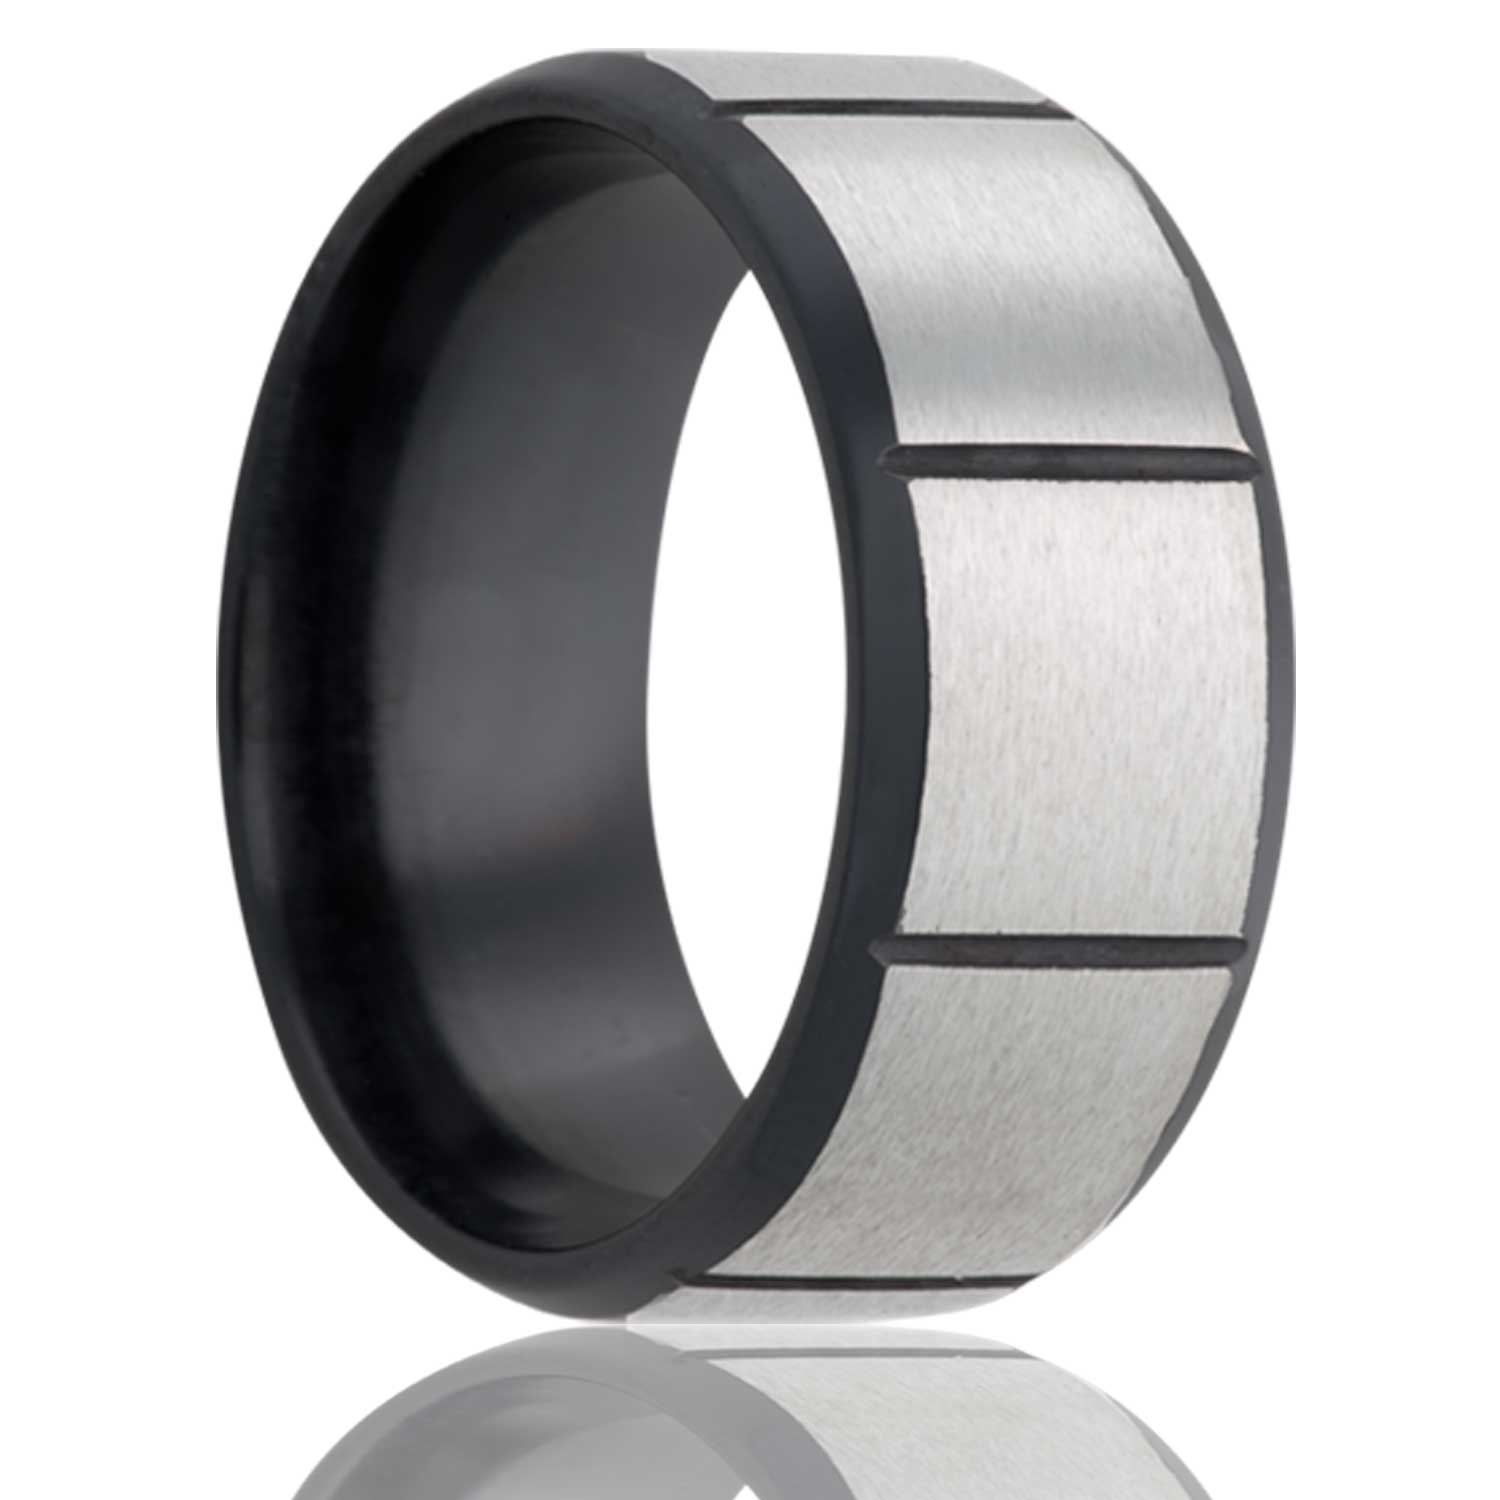 A zirconium wedding band with vertical grooves displayed on a neutral white background.